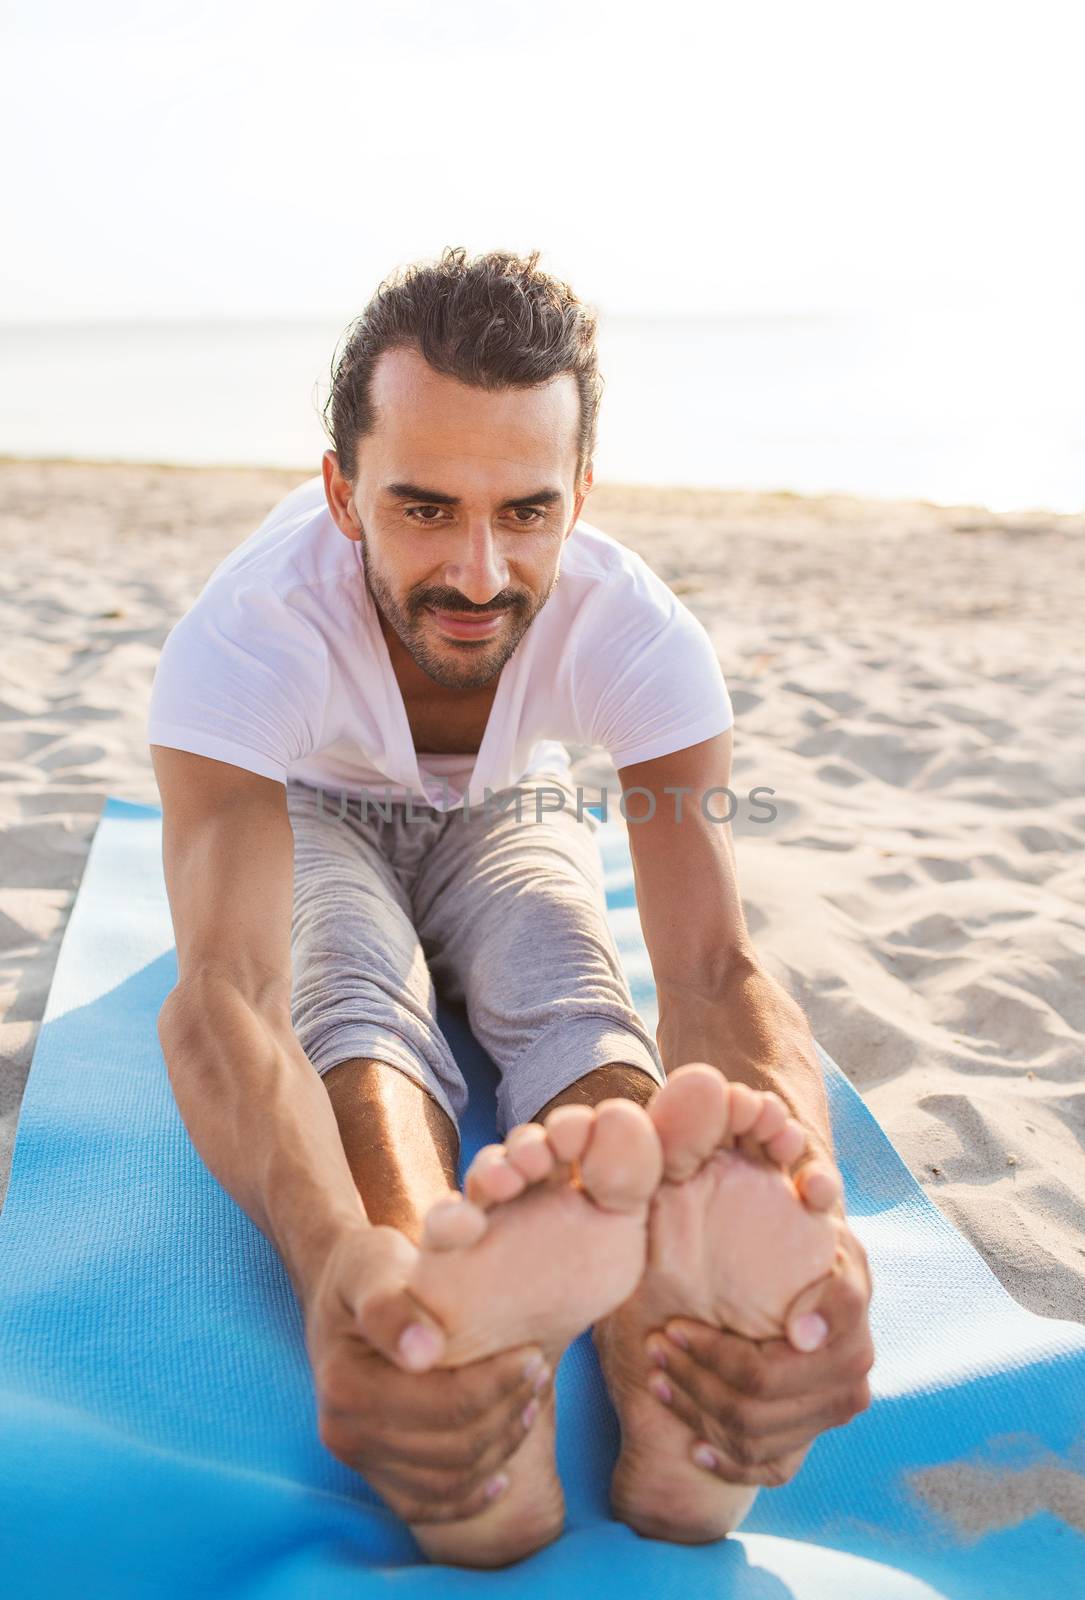 fitness, sport, people and lifestyle concept - man doing yoga exercises sitting on mat outdoors